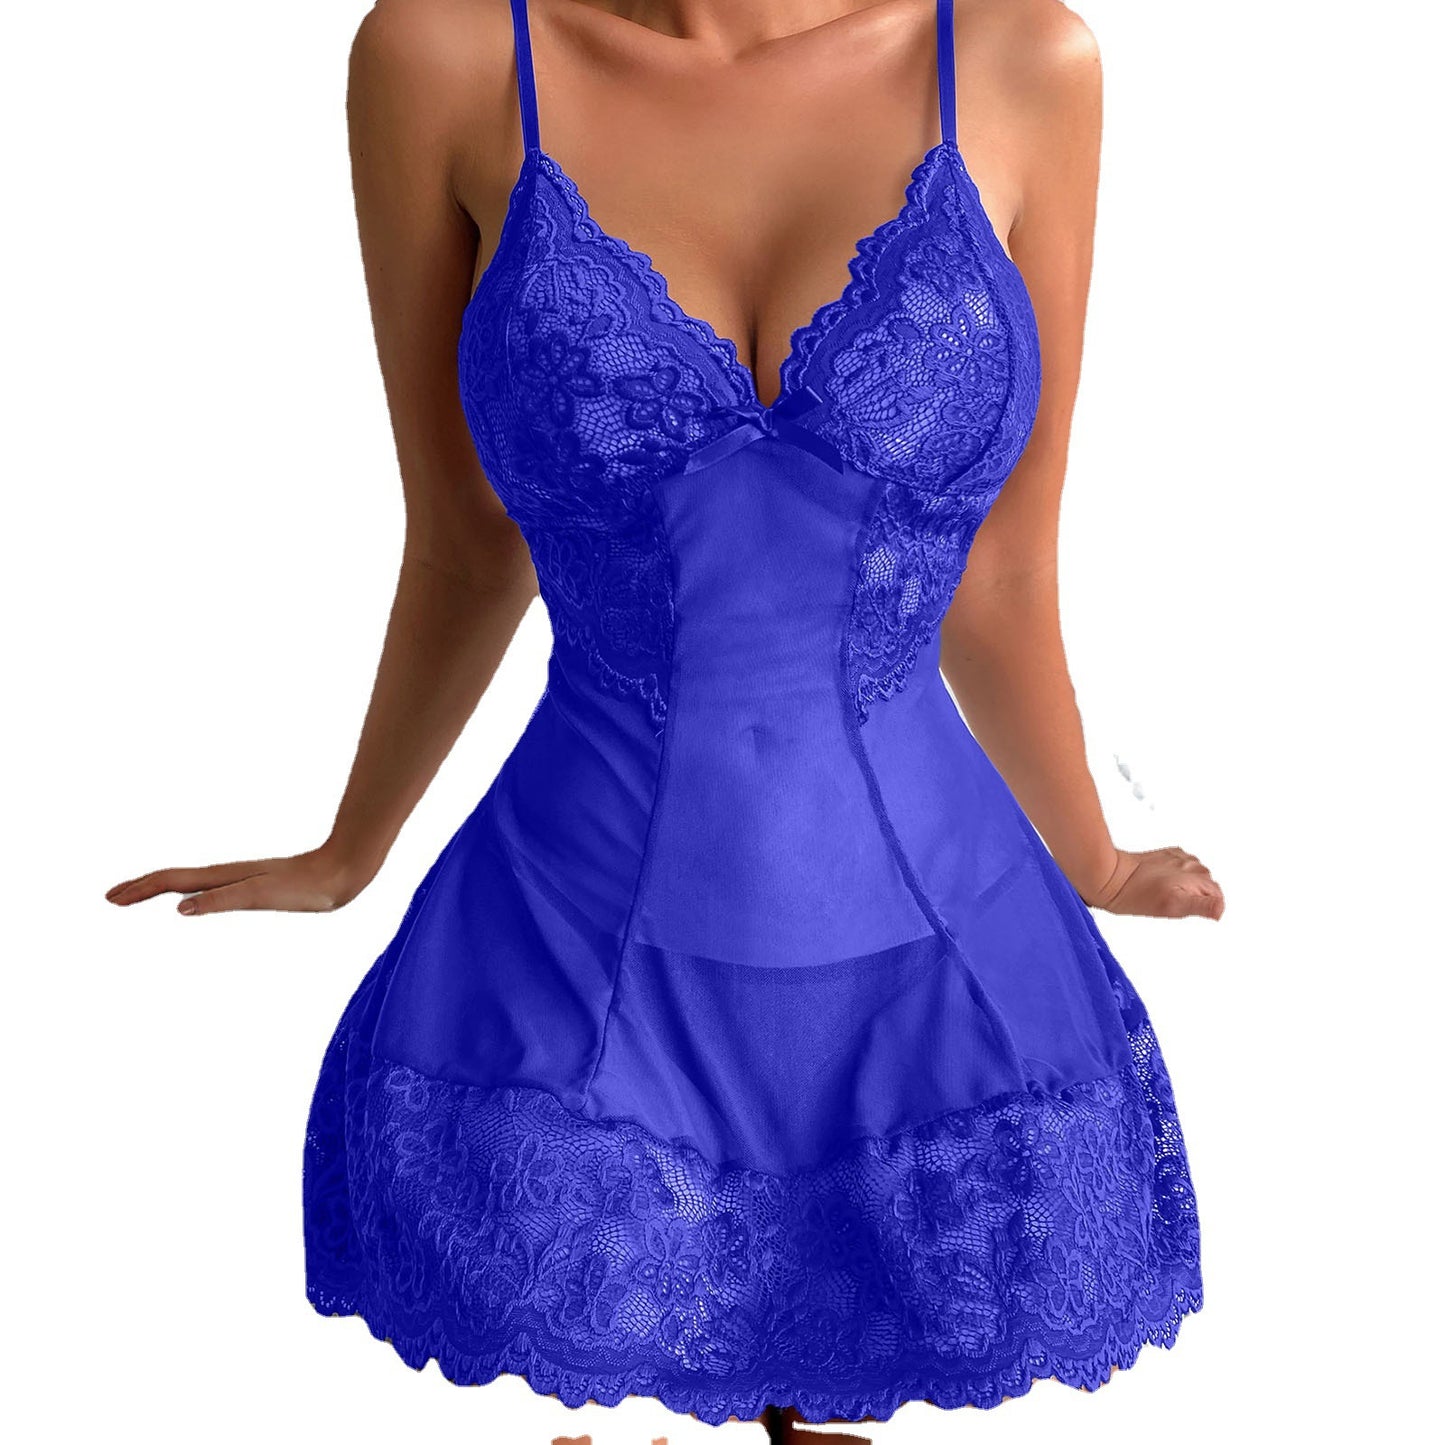 Female European And American Style Lace Seduction Nightdress